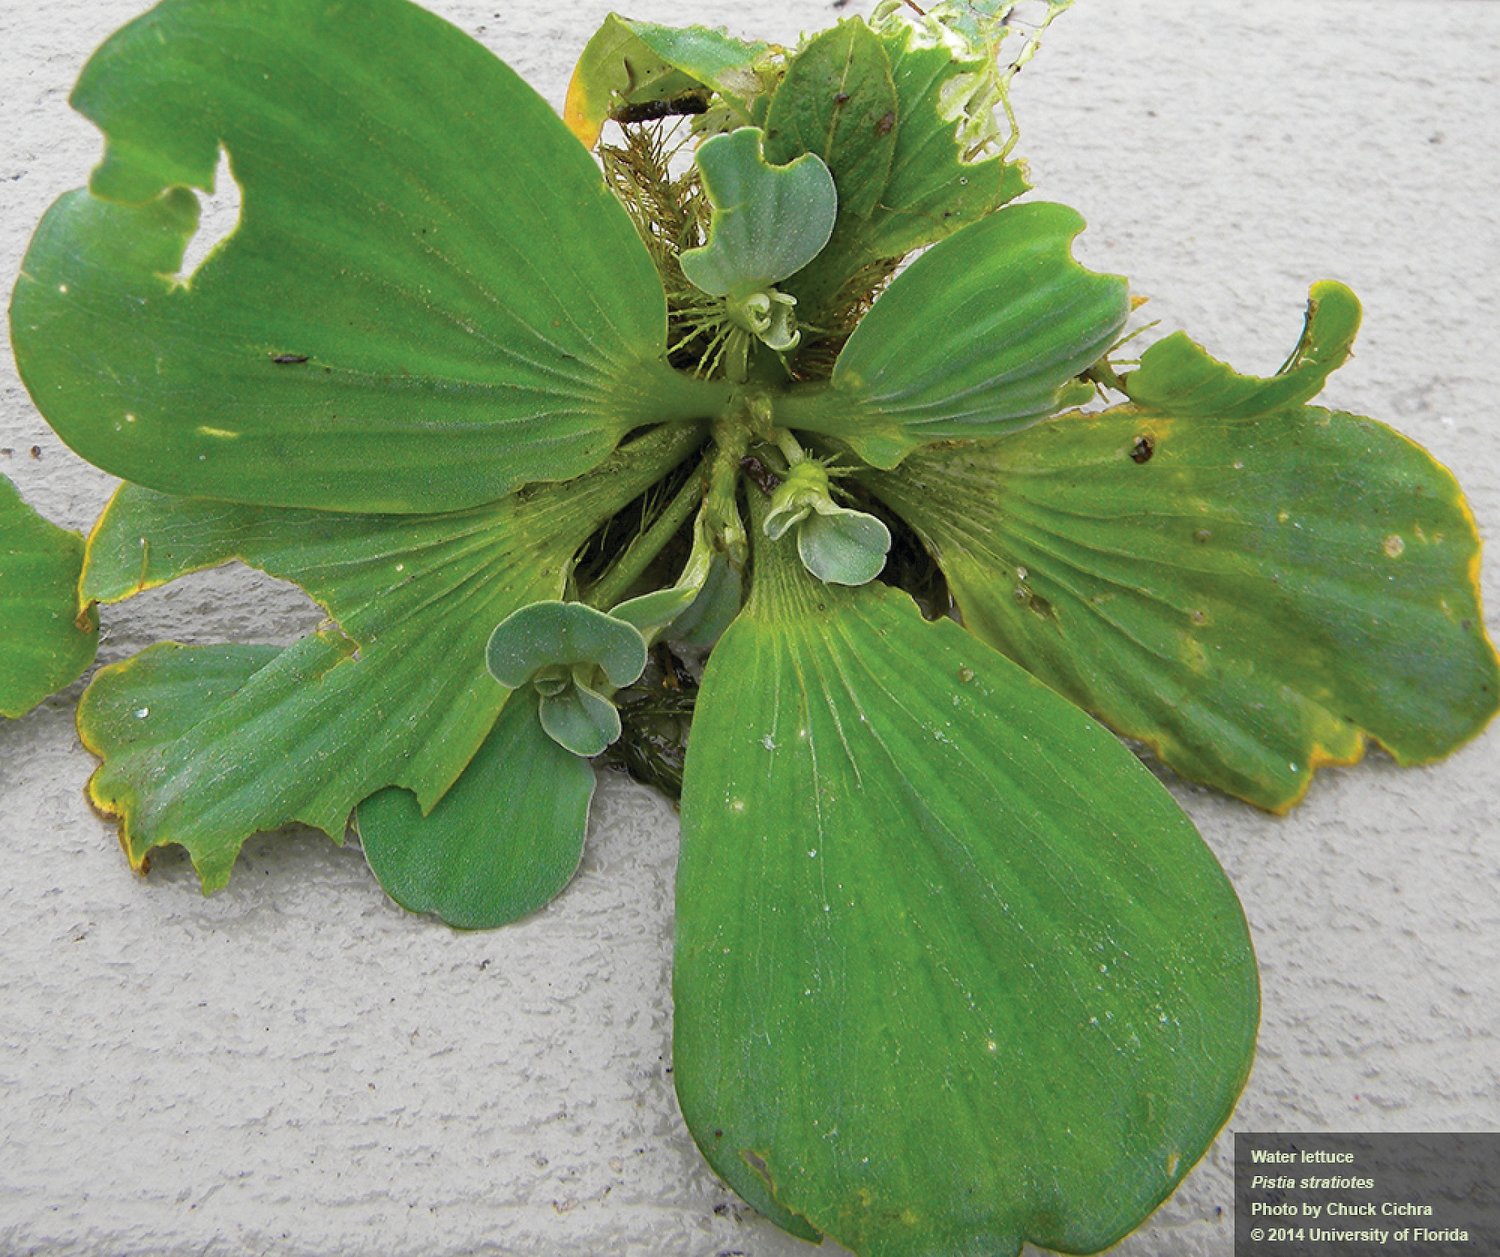 Water lettuce is considered an invasive species by the Florida Fish and Wildlife Conservation Commission.